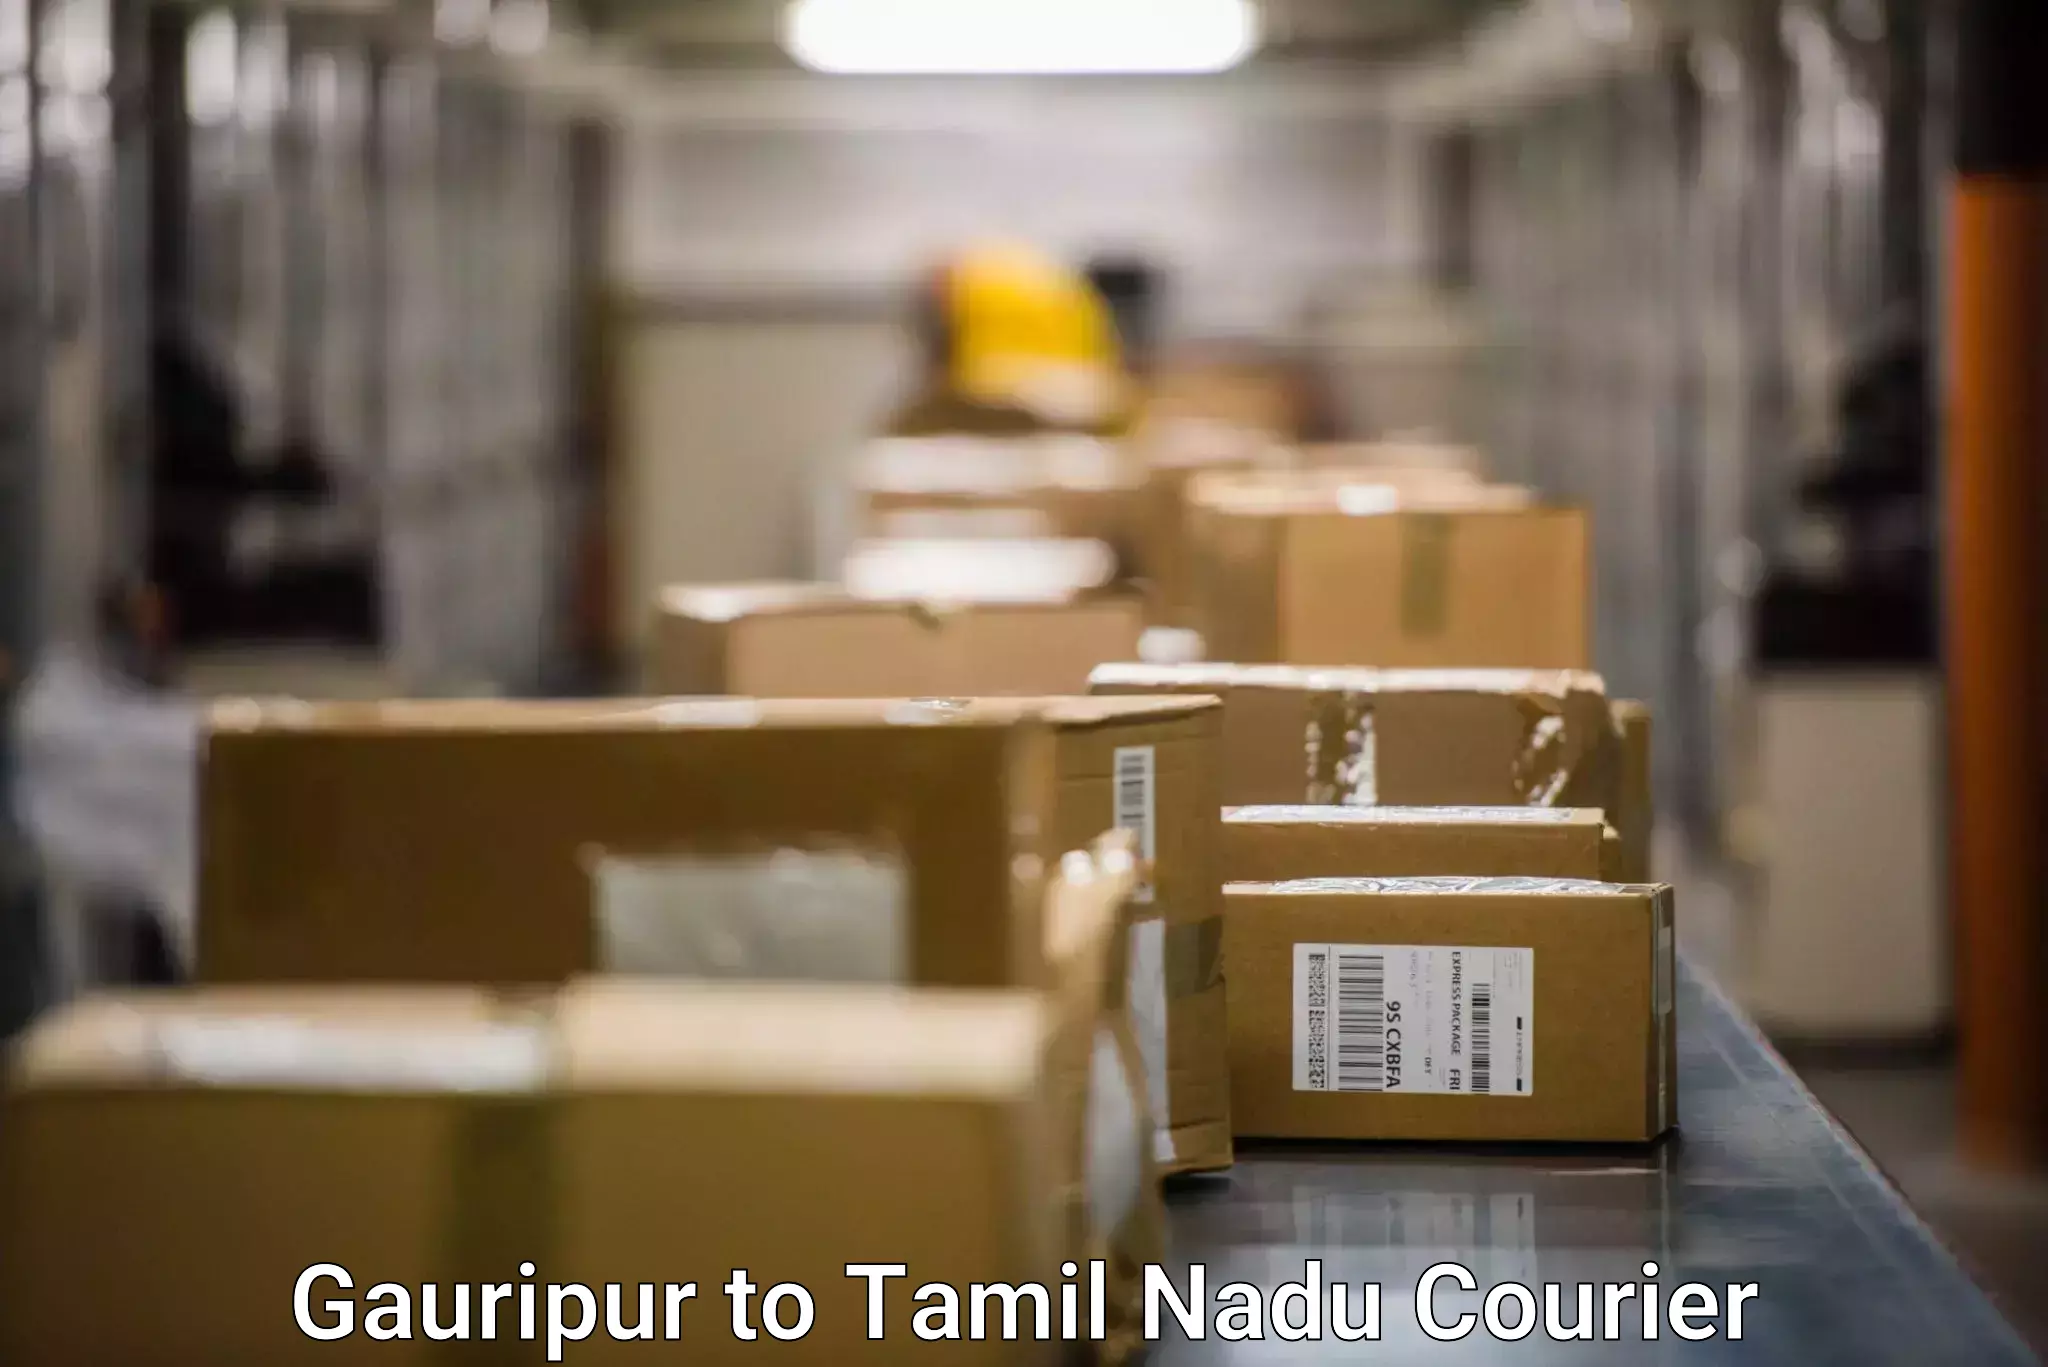 Optimized shipping routes Gauripur to Tamil Nadu